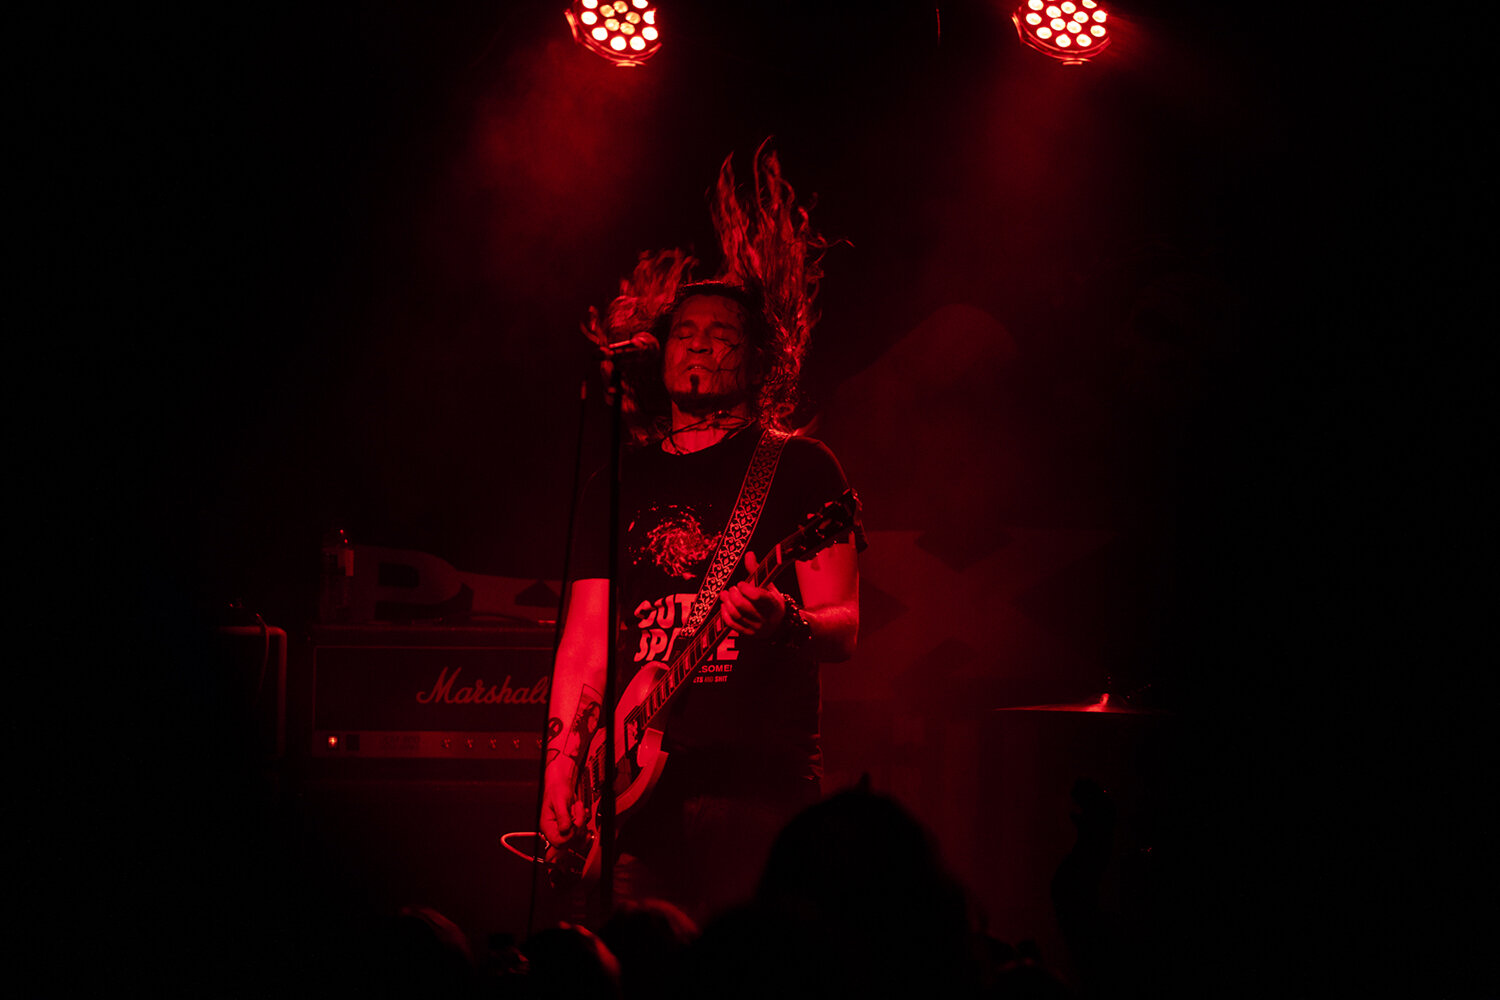 Phil X and The Drills at Rebellion in Manchester on March 7th 2020